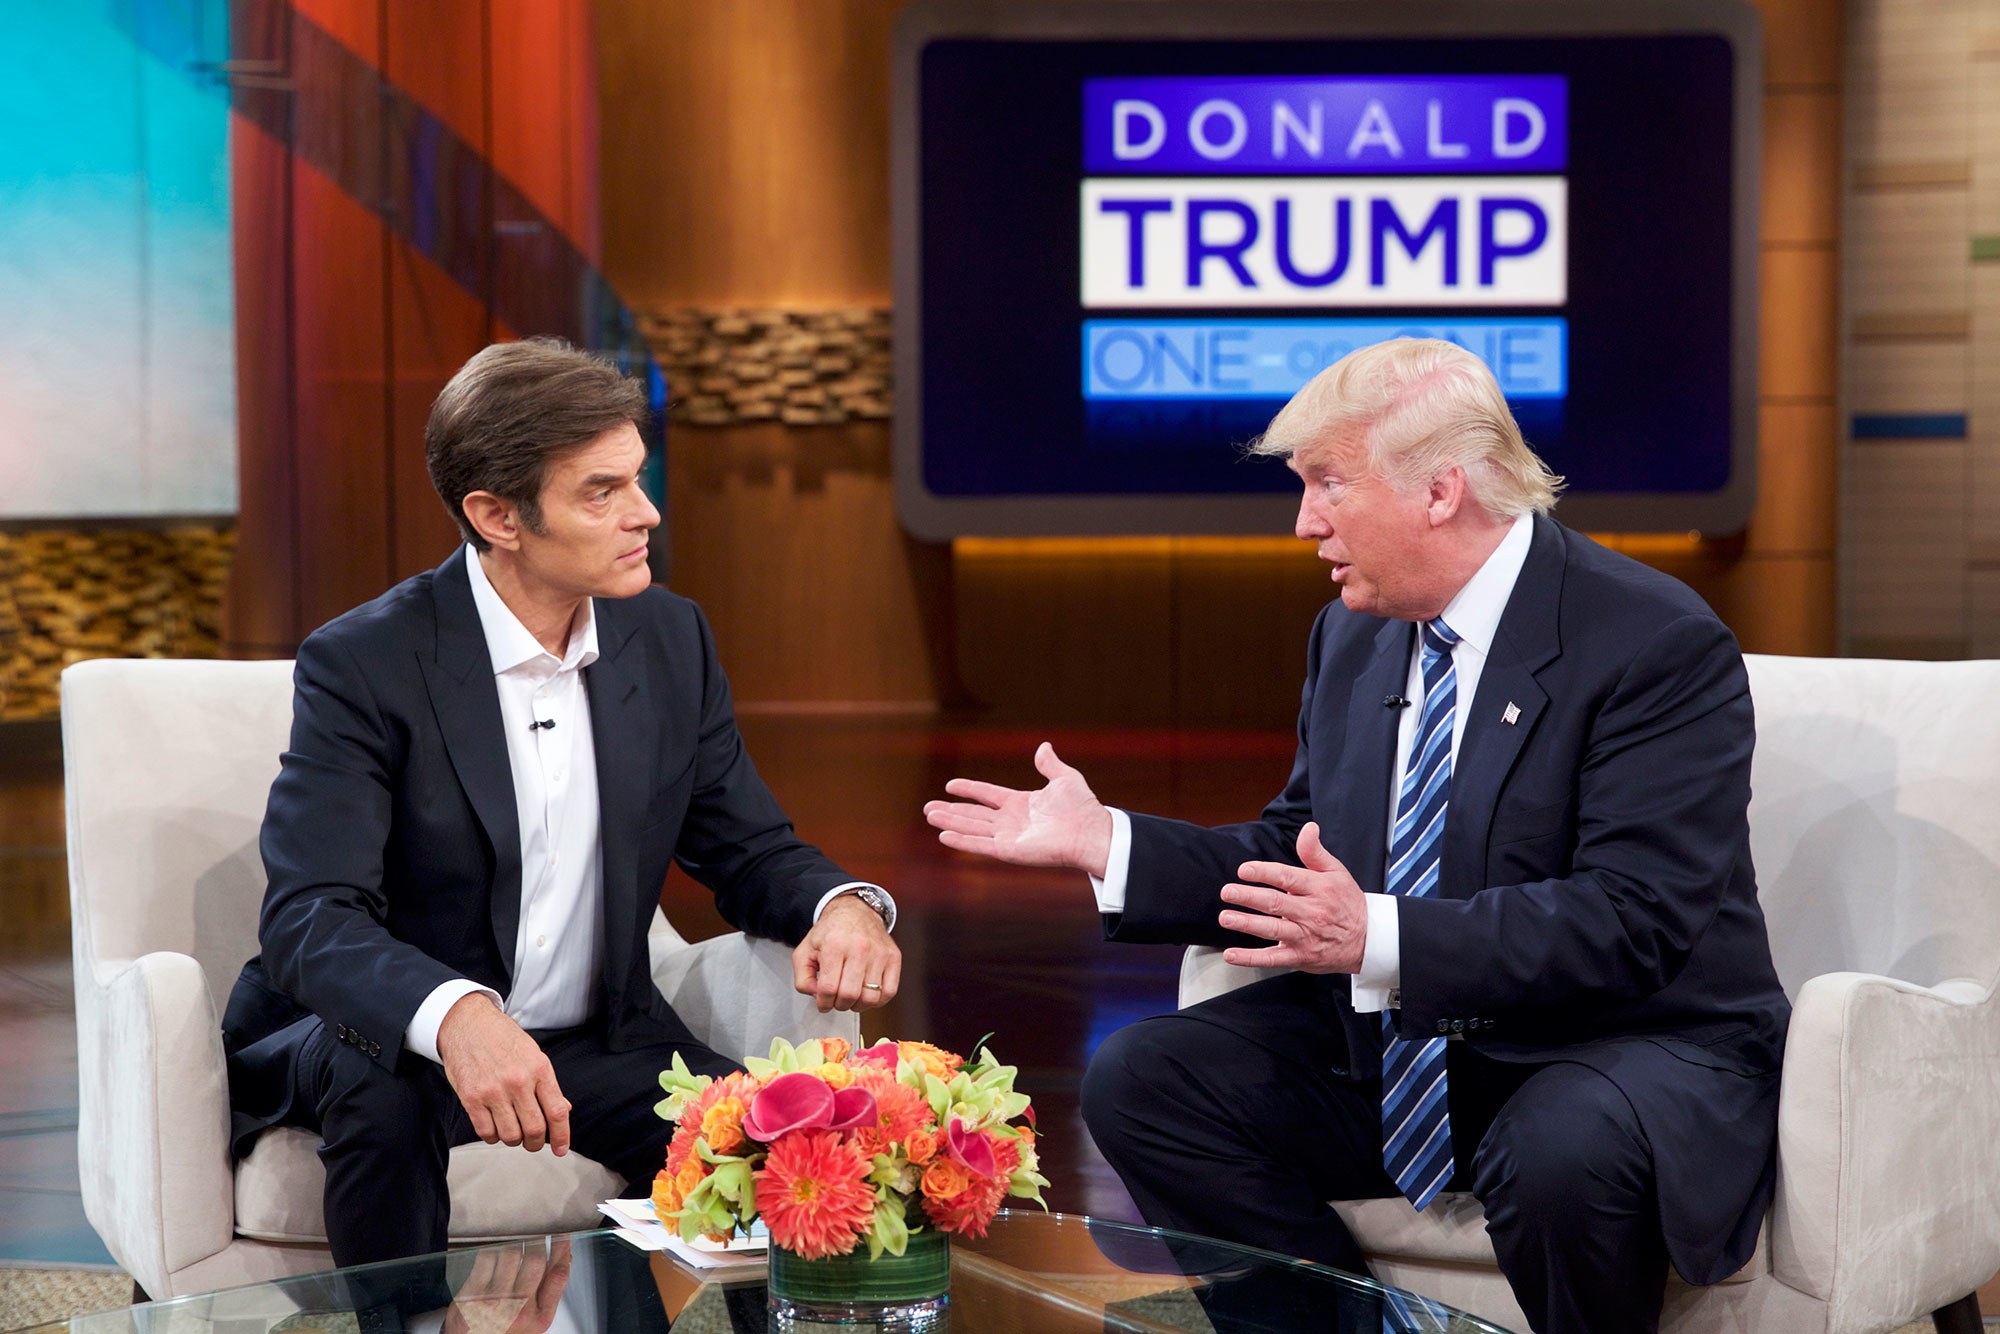 CNN: Trump appointing Dr. Oz to his sport, fitness and nutrition council